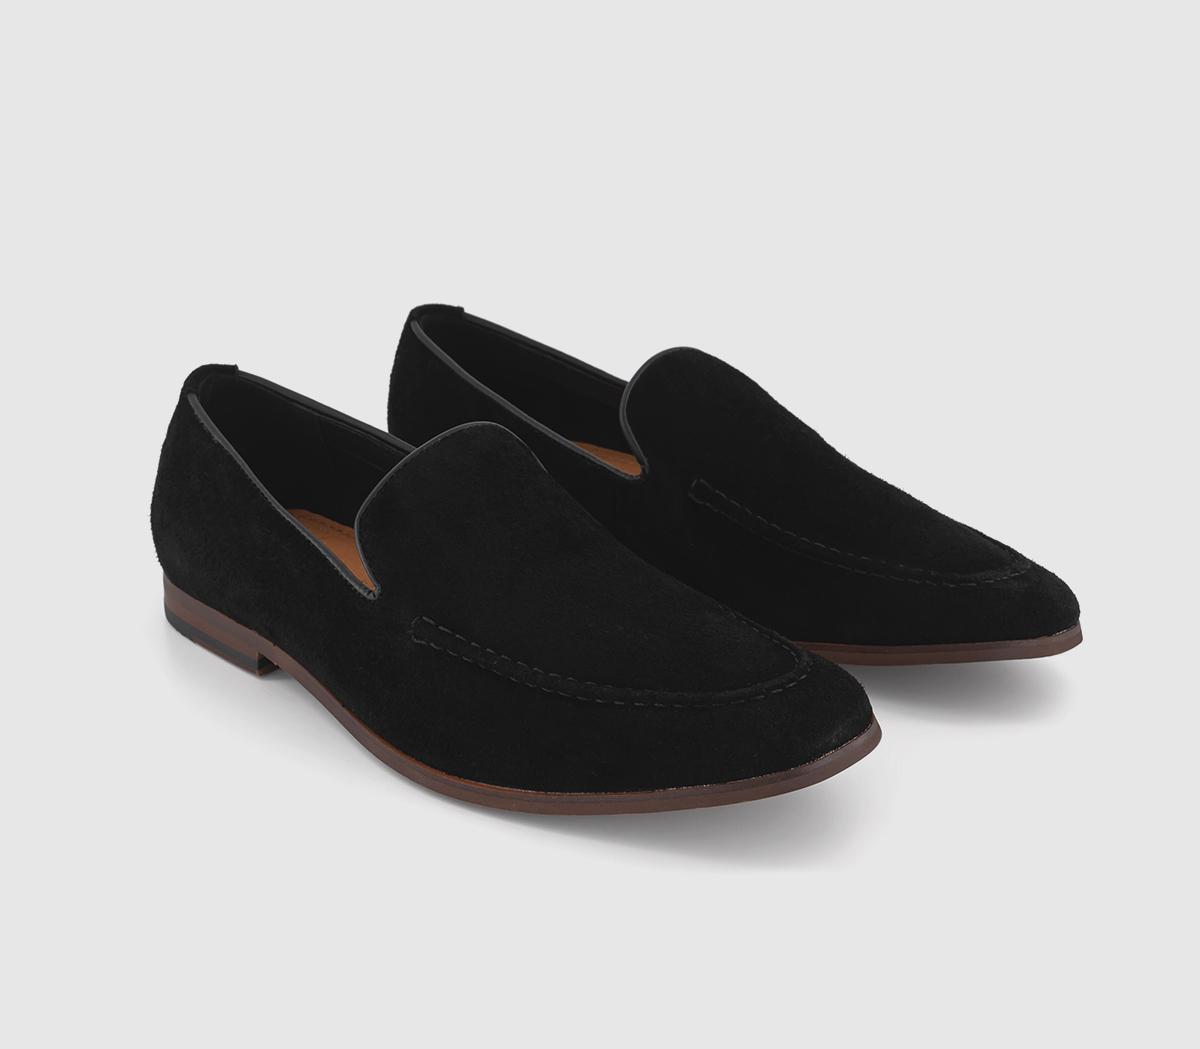 OFFICE Mens Cody Slip On Loafers Black Suede, 6